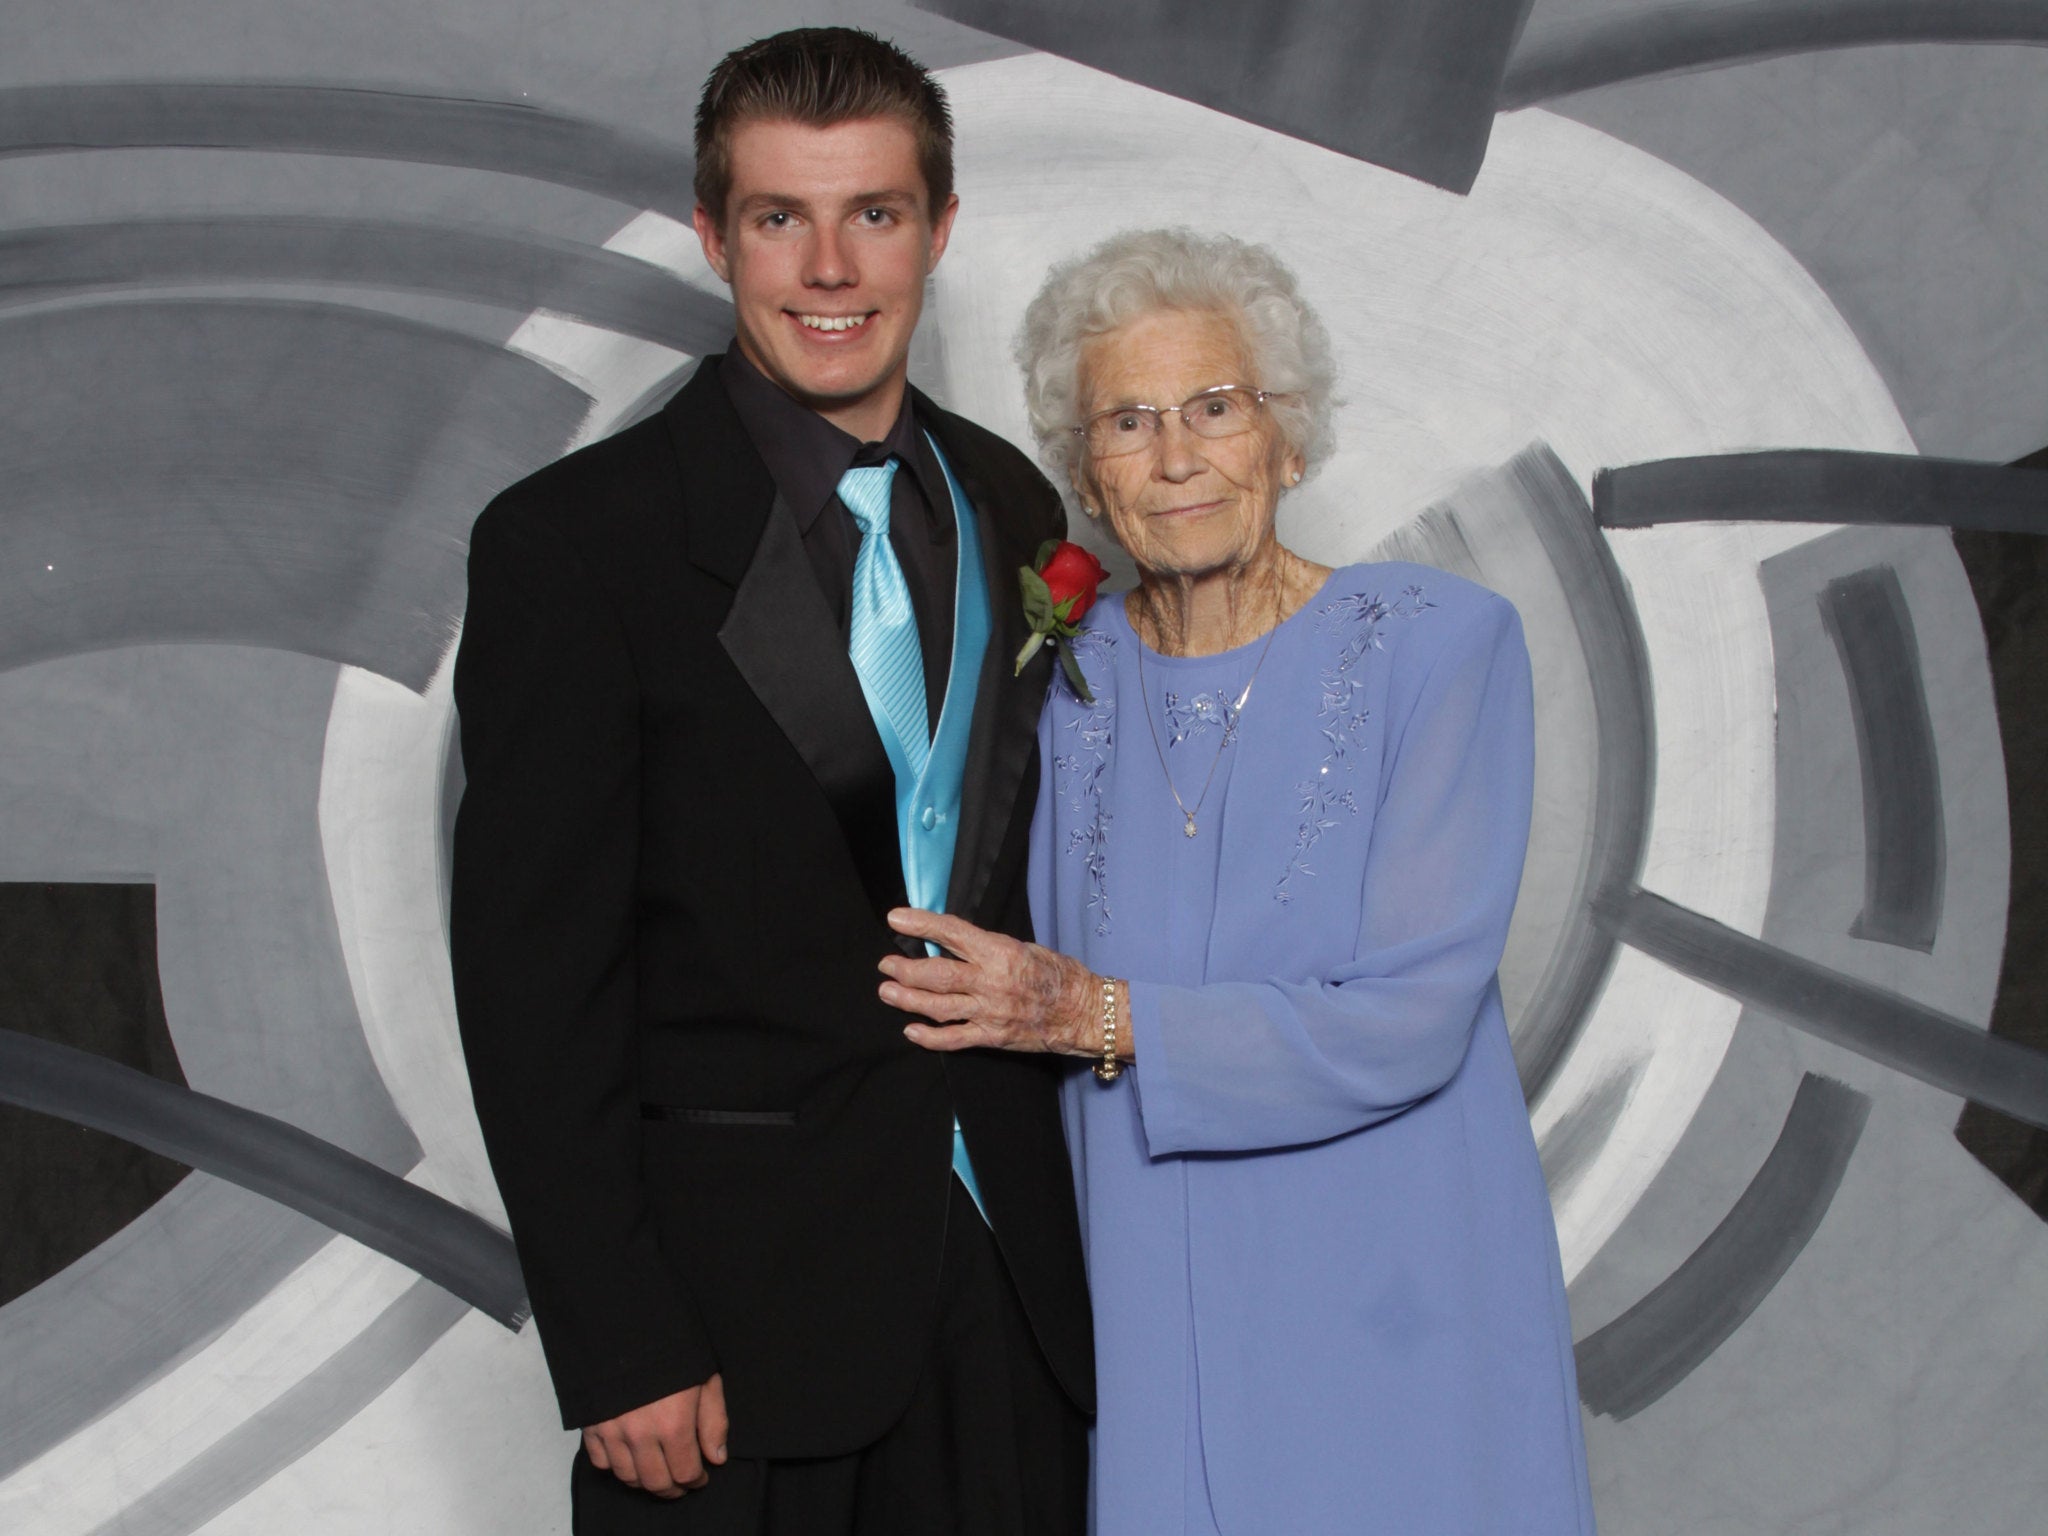 Drew Holm and his great-grandmother Katie Keith in their prom picture